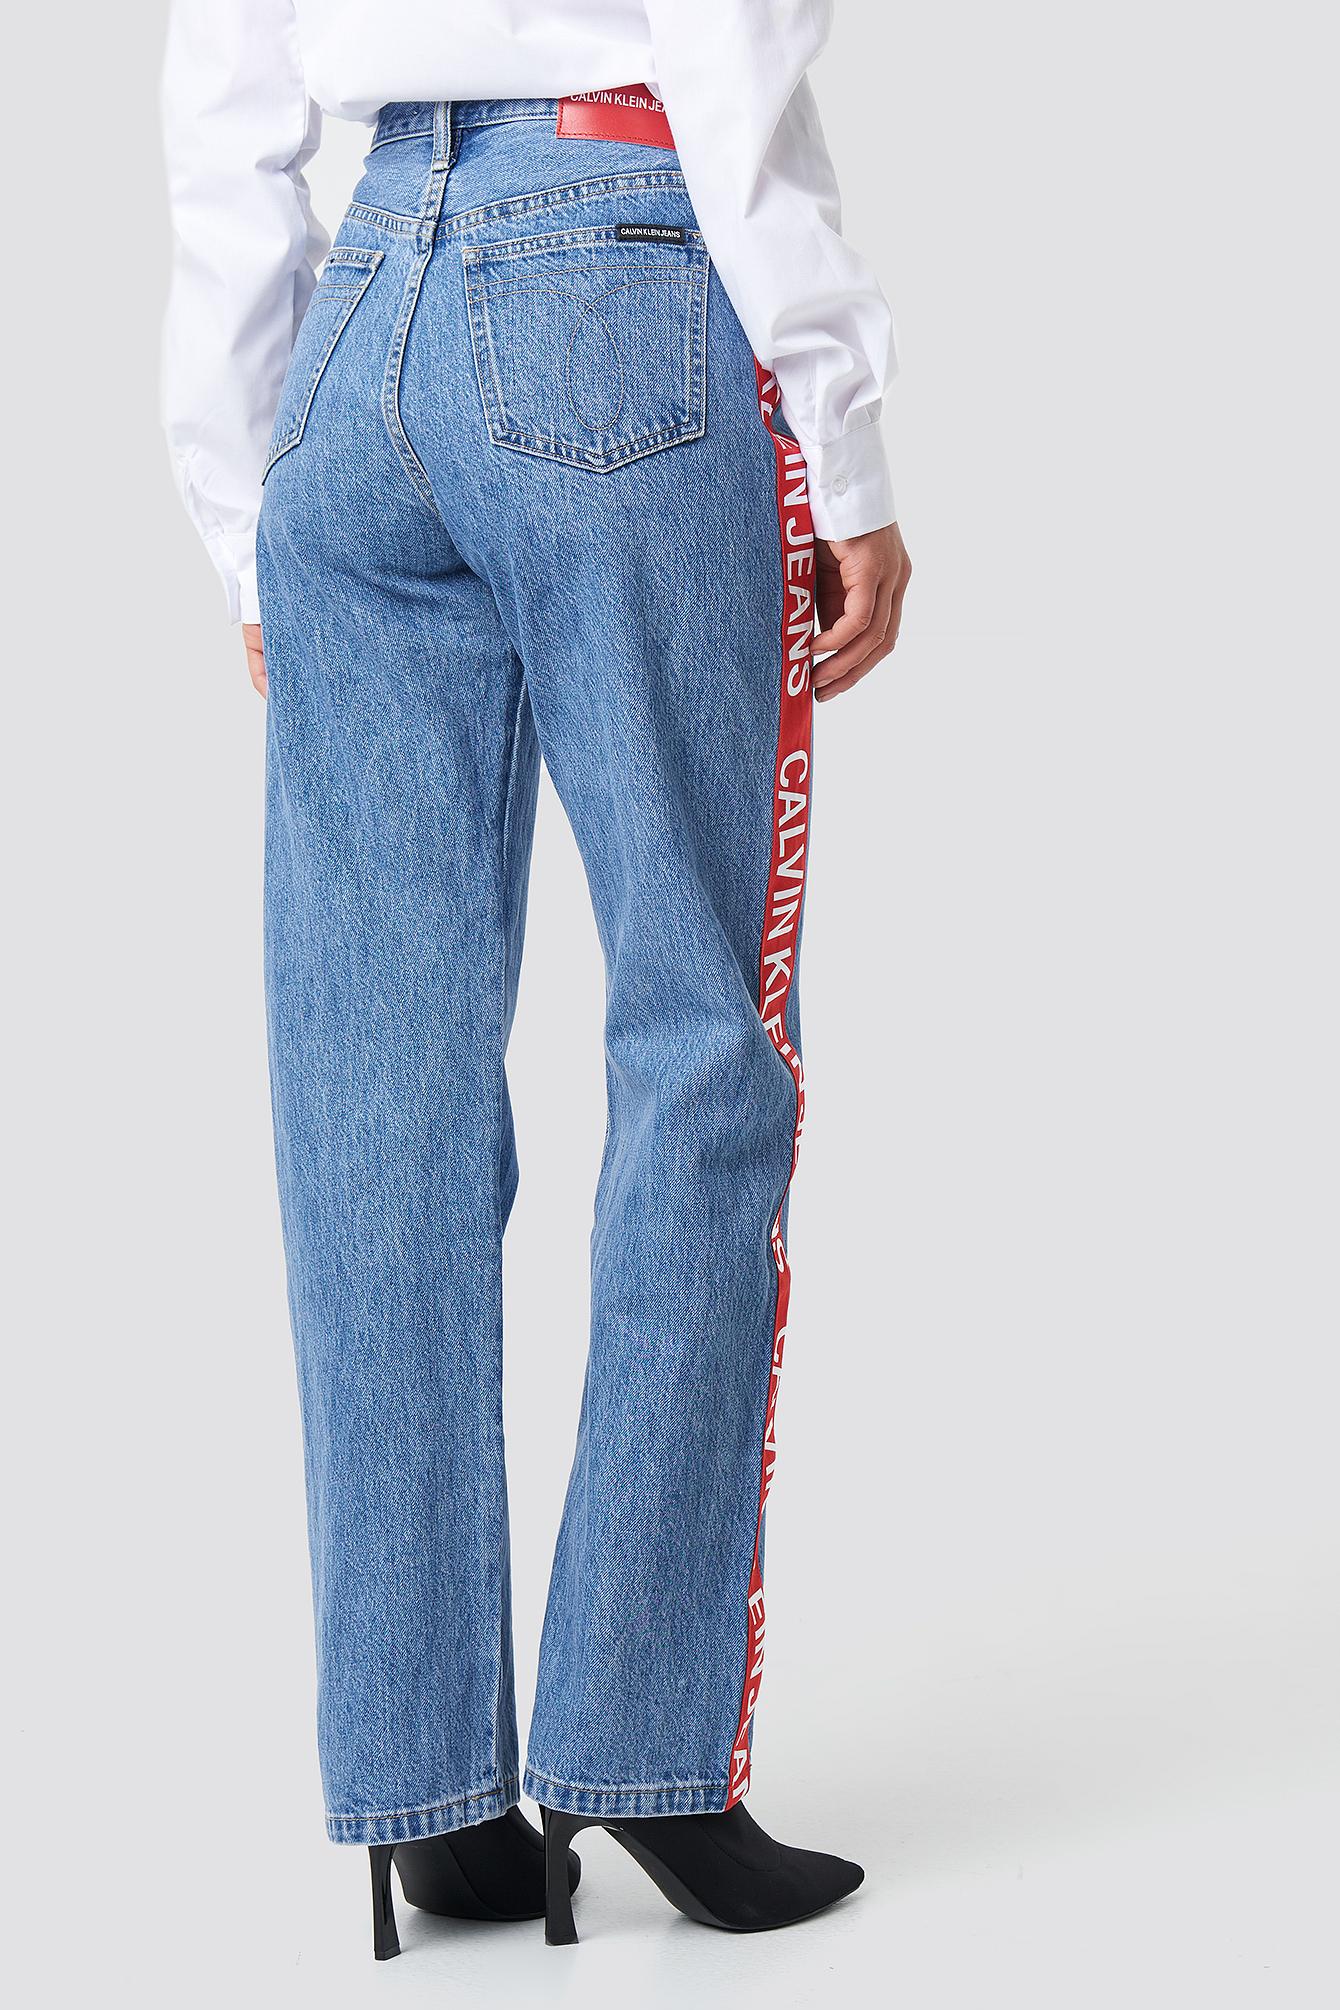 calvin klein jeans with red stripe Hot Sale - OFF 73%